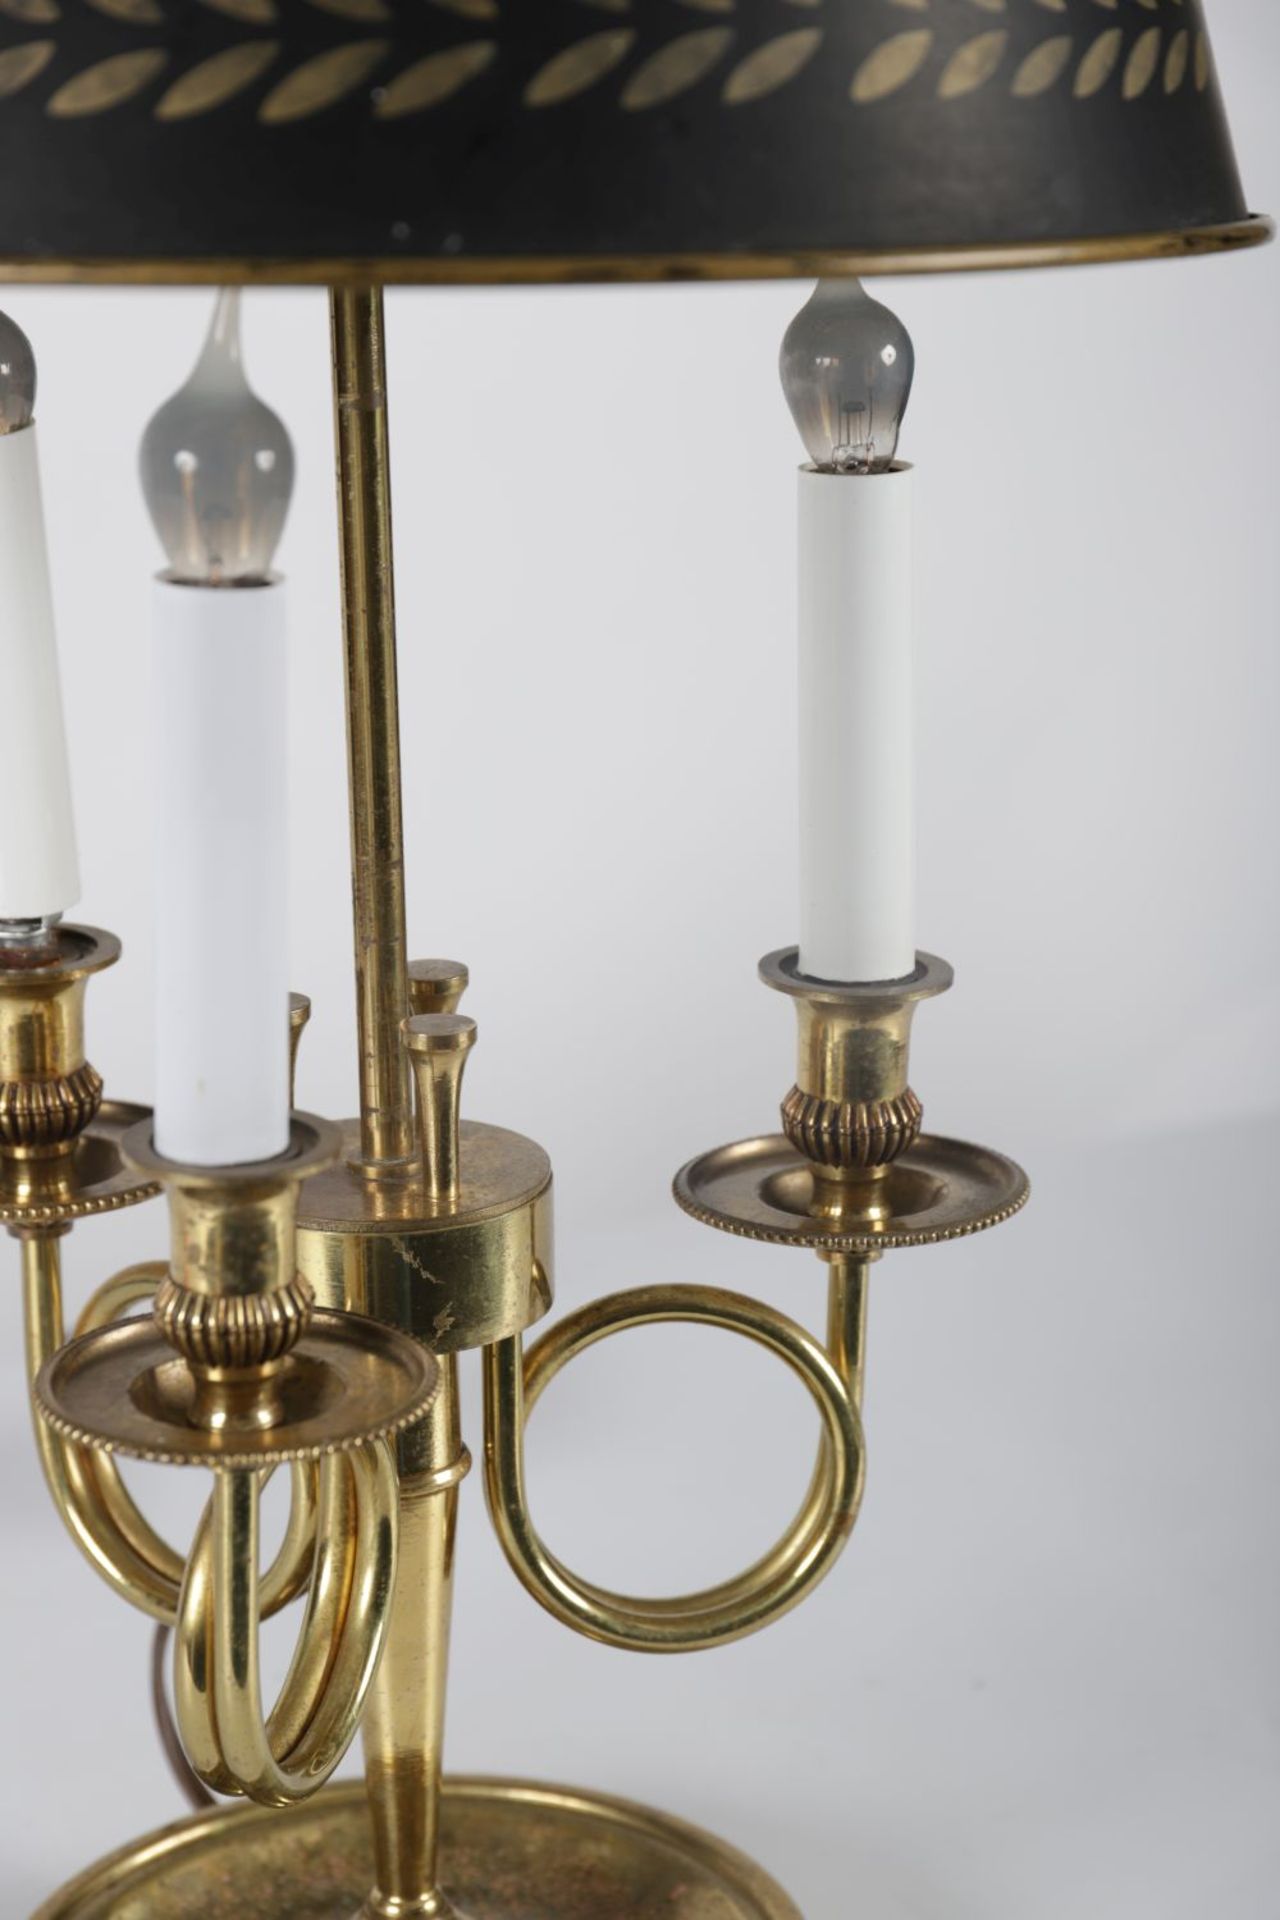 EDWARDIAN BRASS TABLE LAMP - Image 3 of 4